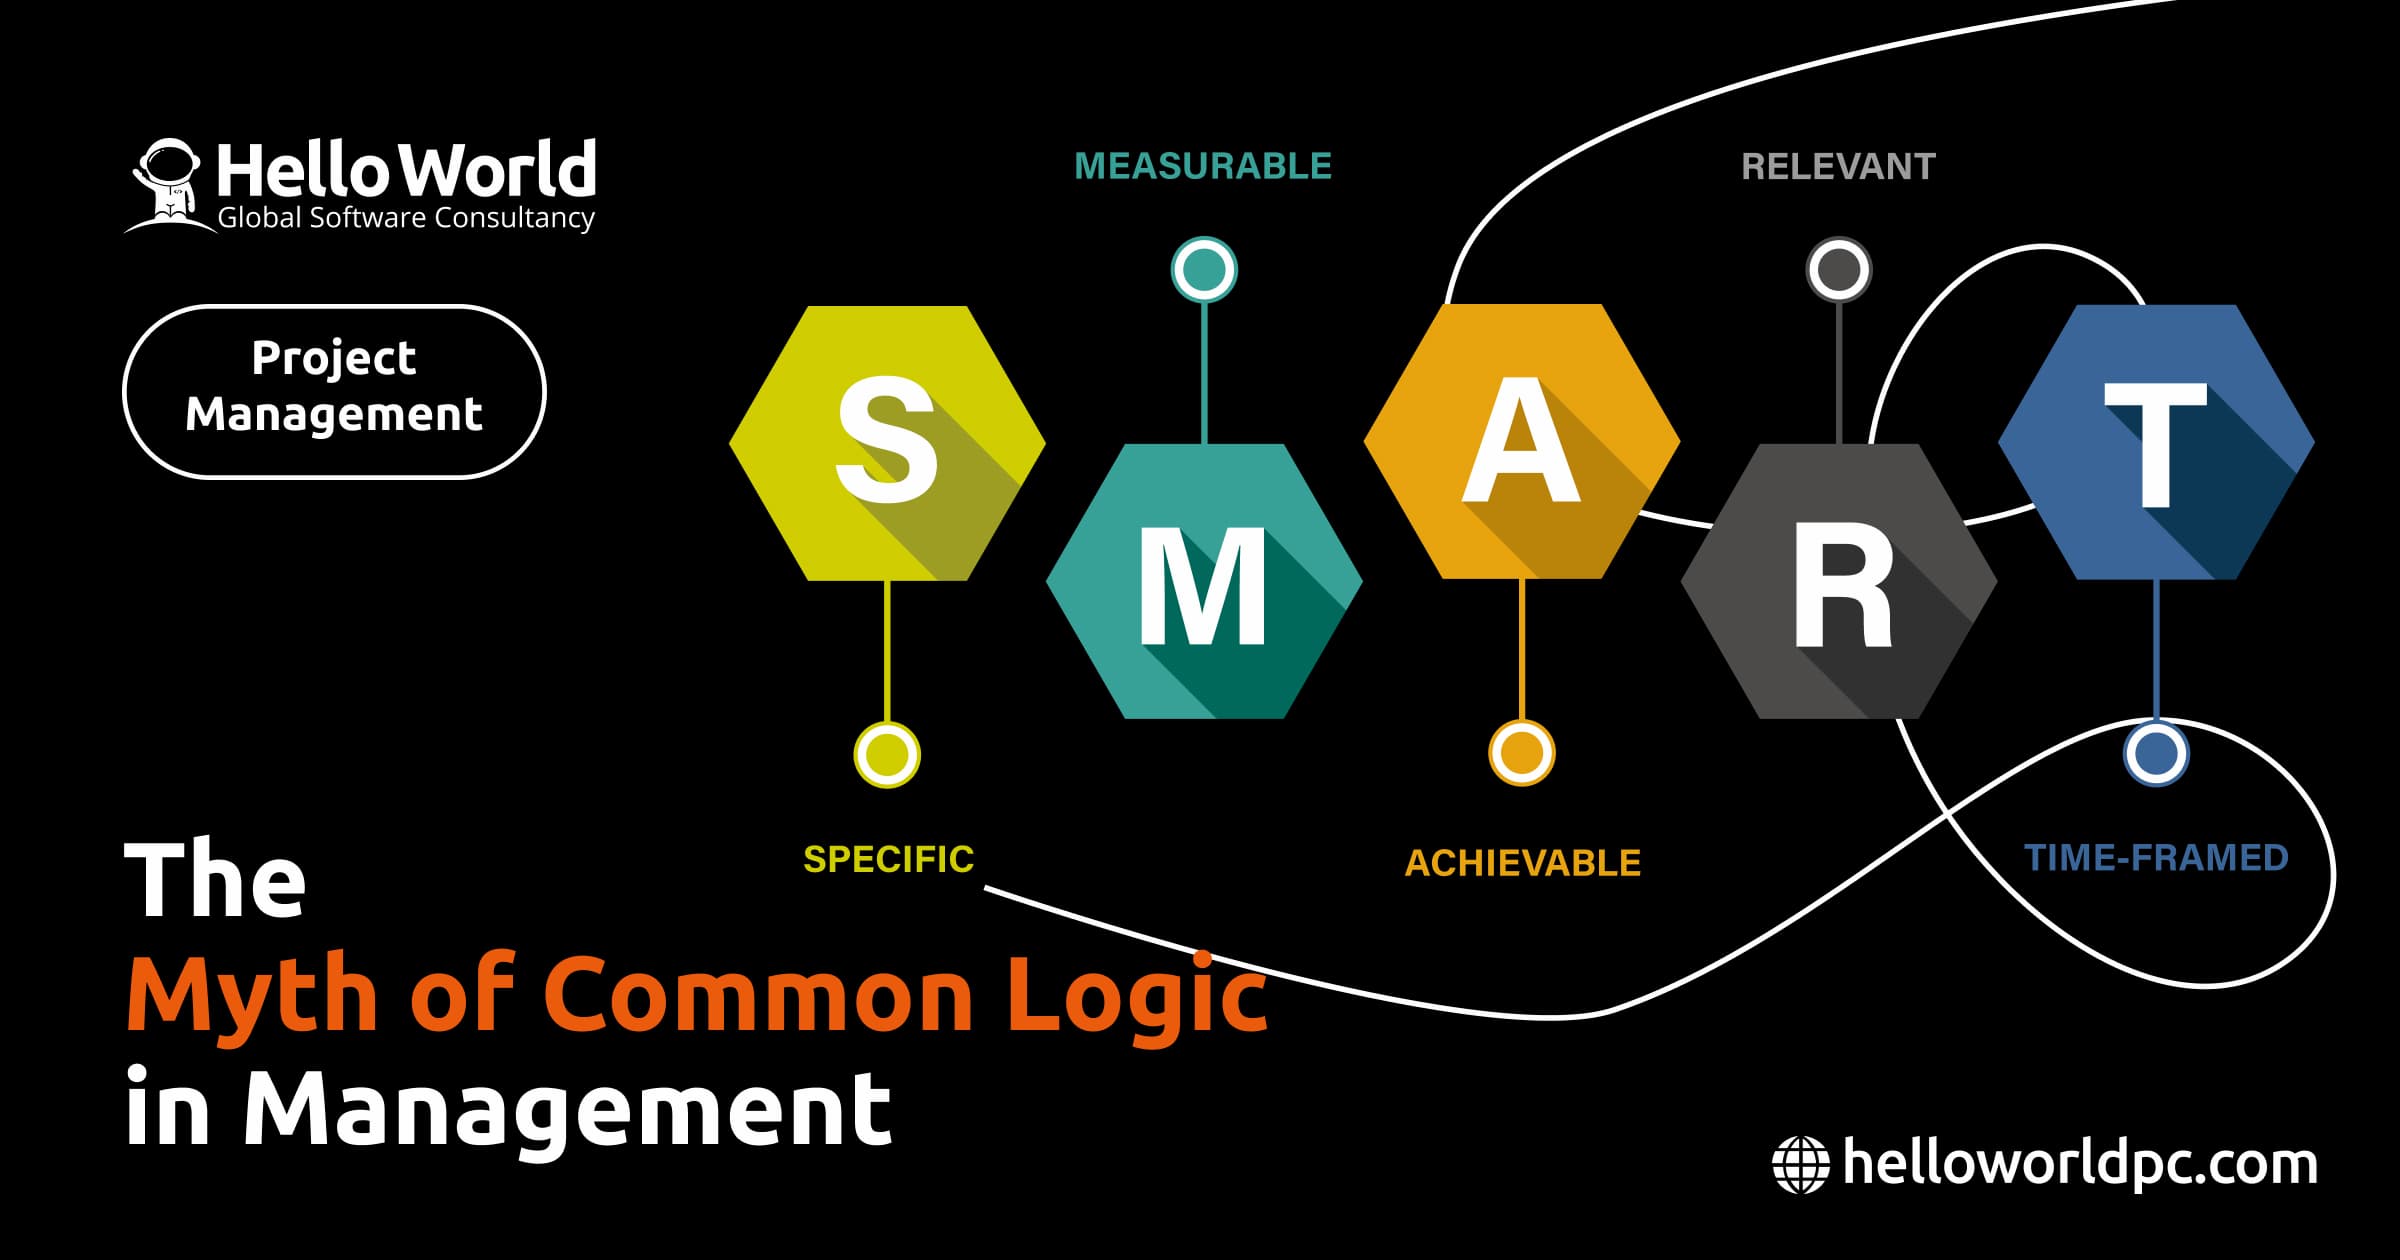 The Myth of common logic in management: The key to success lies in clarity and S.M.A.R.T. directions